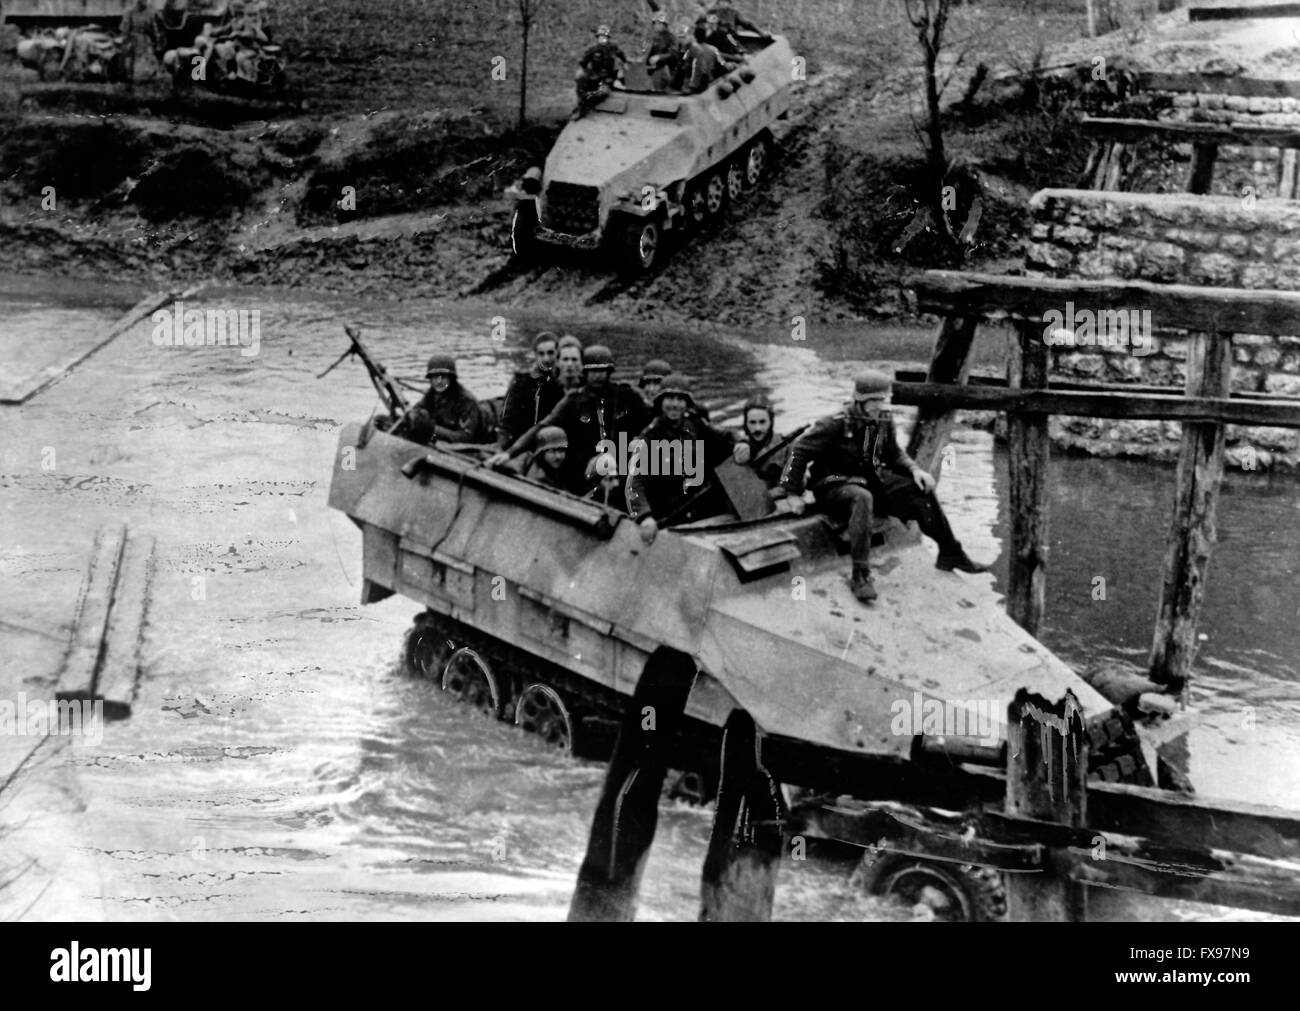 The Nazi propaganda picture shows soldiers of the German Wehrmacht fighting partisans in Yugoslavia in an armoured personnel carrier. The photo was taken in April 1944. Fotoarchiv für Zeitgeschichtee - NO WIRE SERVICE - Stock Photo